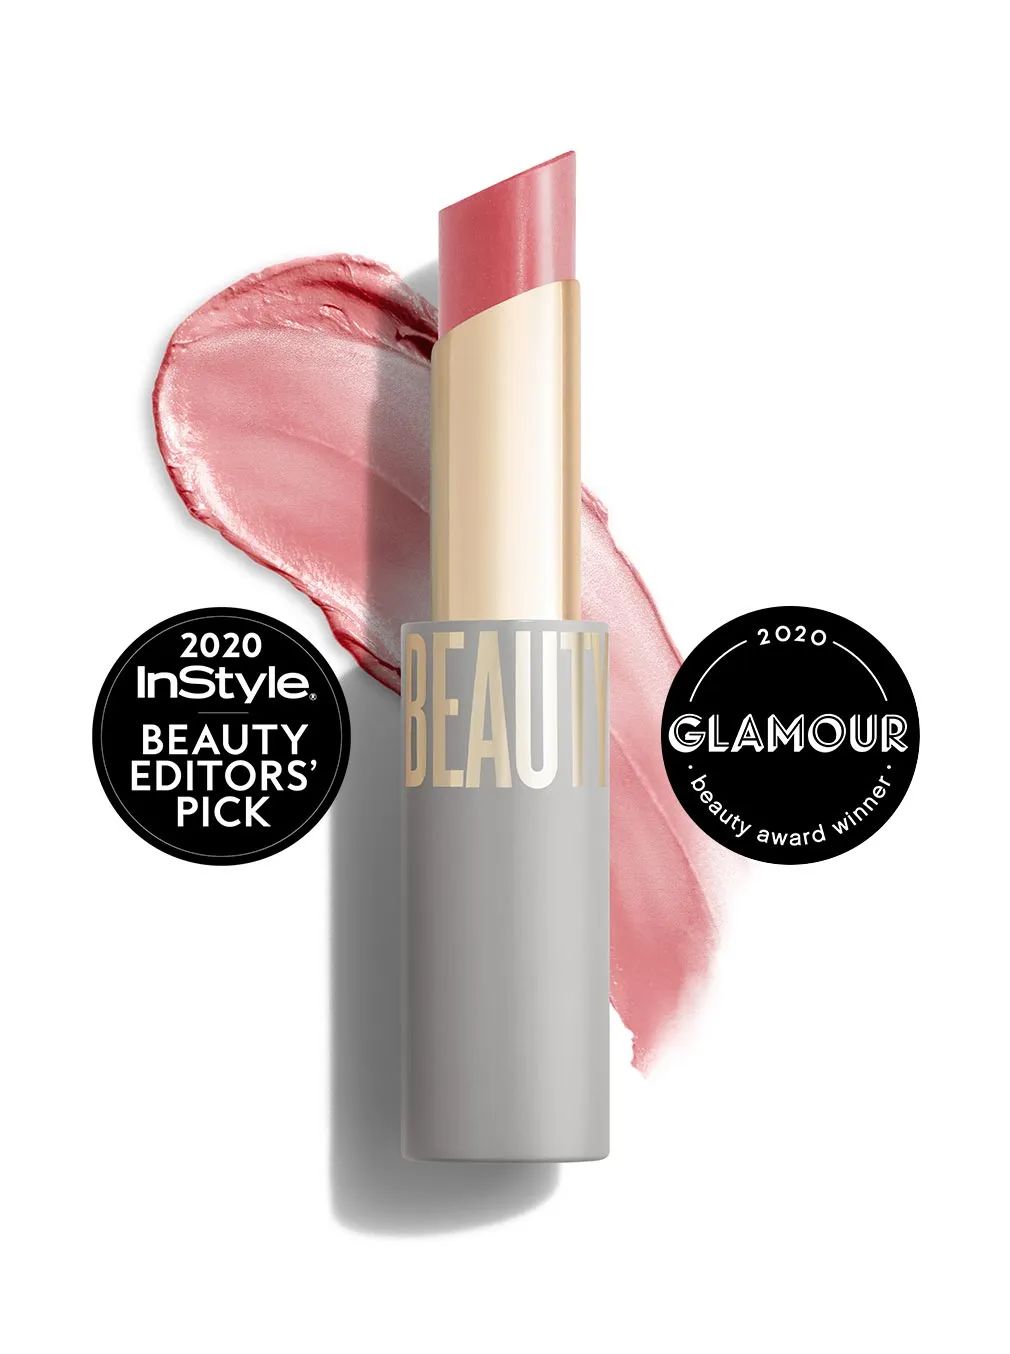 Sheer Genius Conditioning Lipstick - Beautycounter - Skin Care, Makeup, Bath and Body and more! | Beautycounter.com